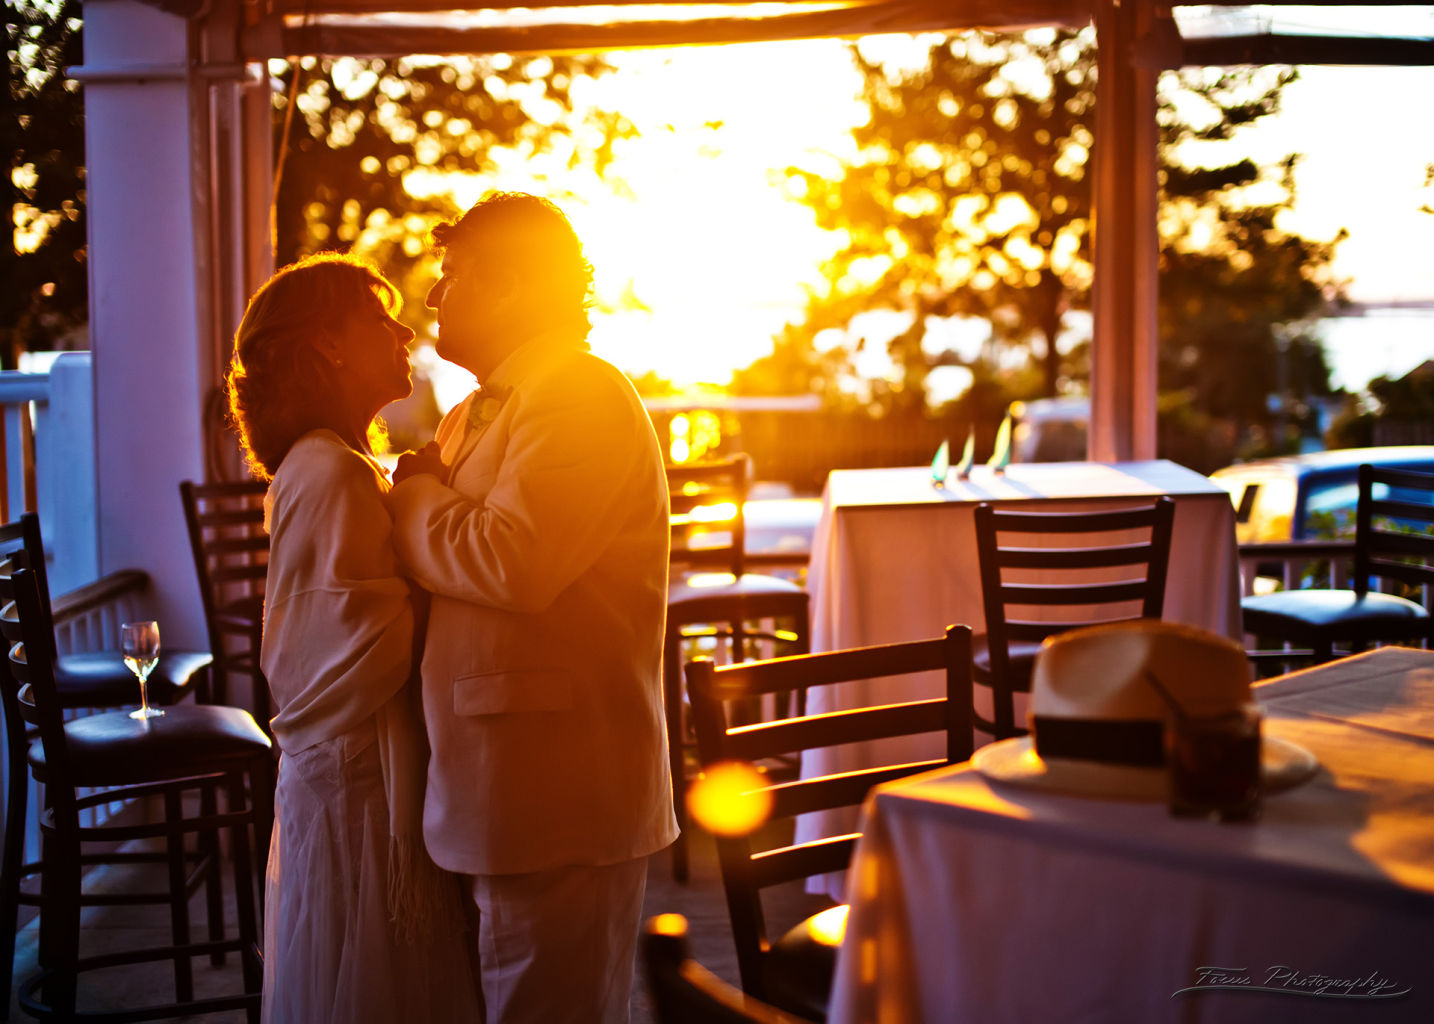 Bride and groom embracing each other at reception with sunset